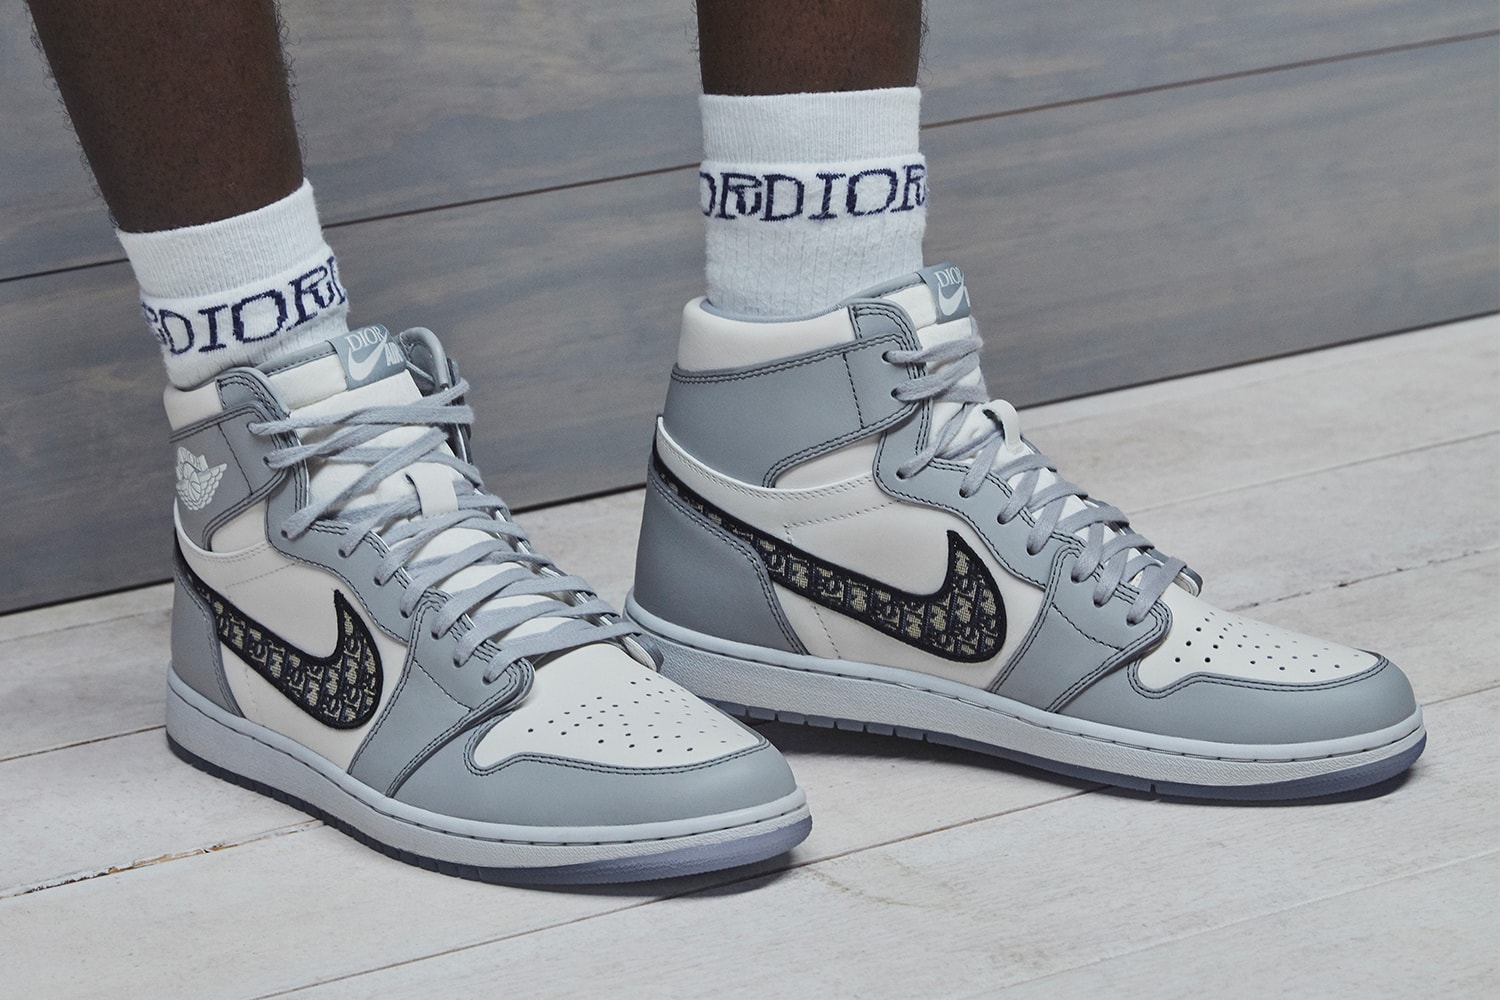 Here's What People Think About the Dior x Air Jordan 1s